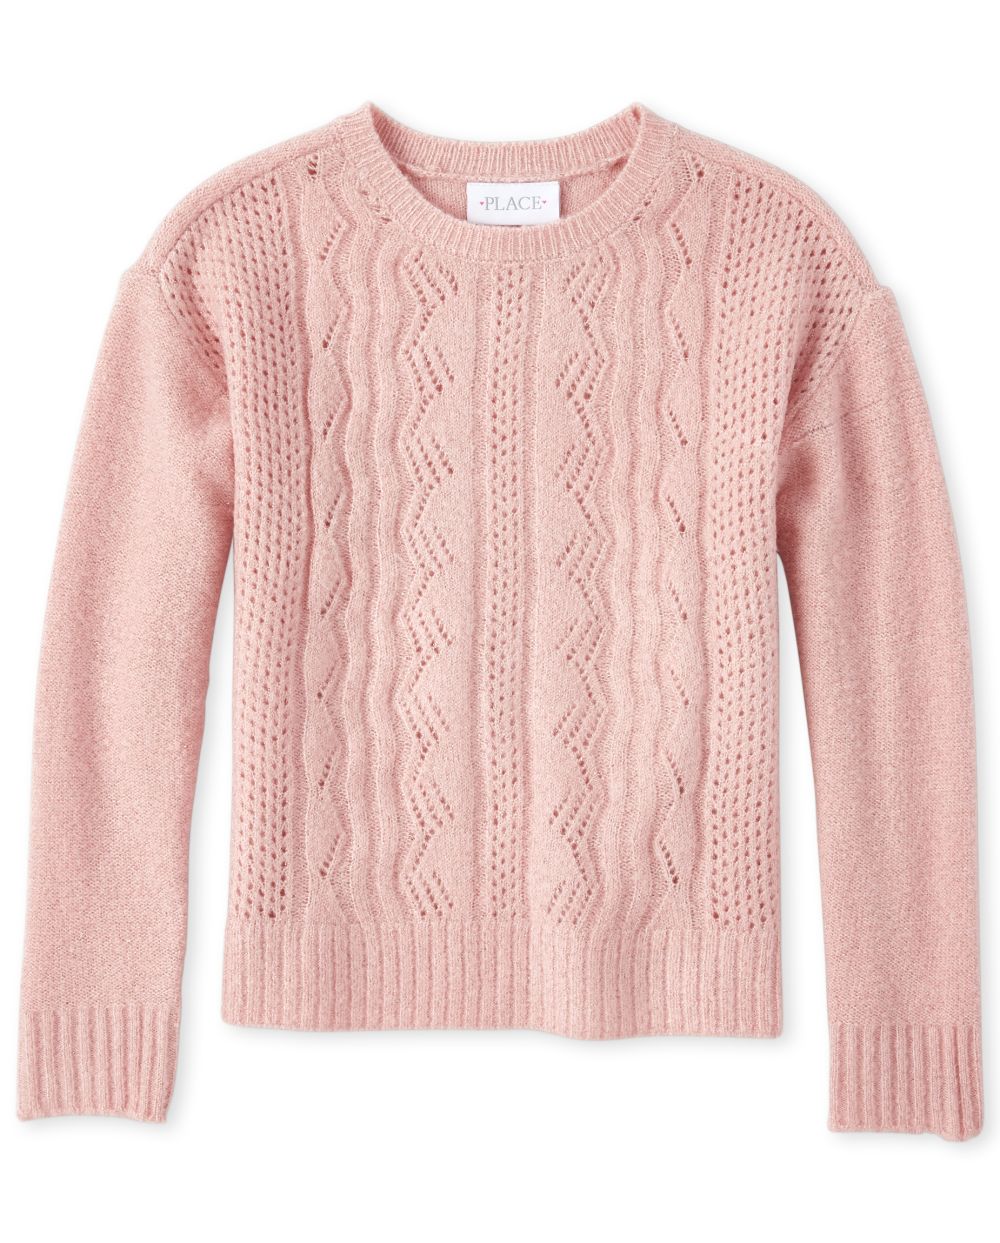 Girls Long Sleeve Glitter Cable Knit Sweater